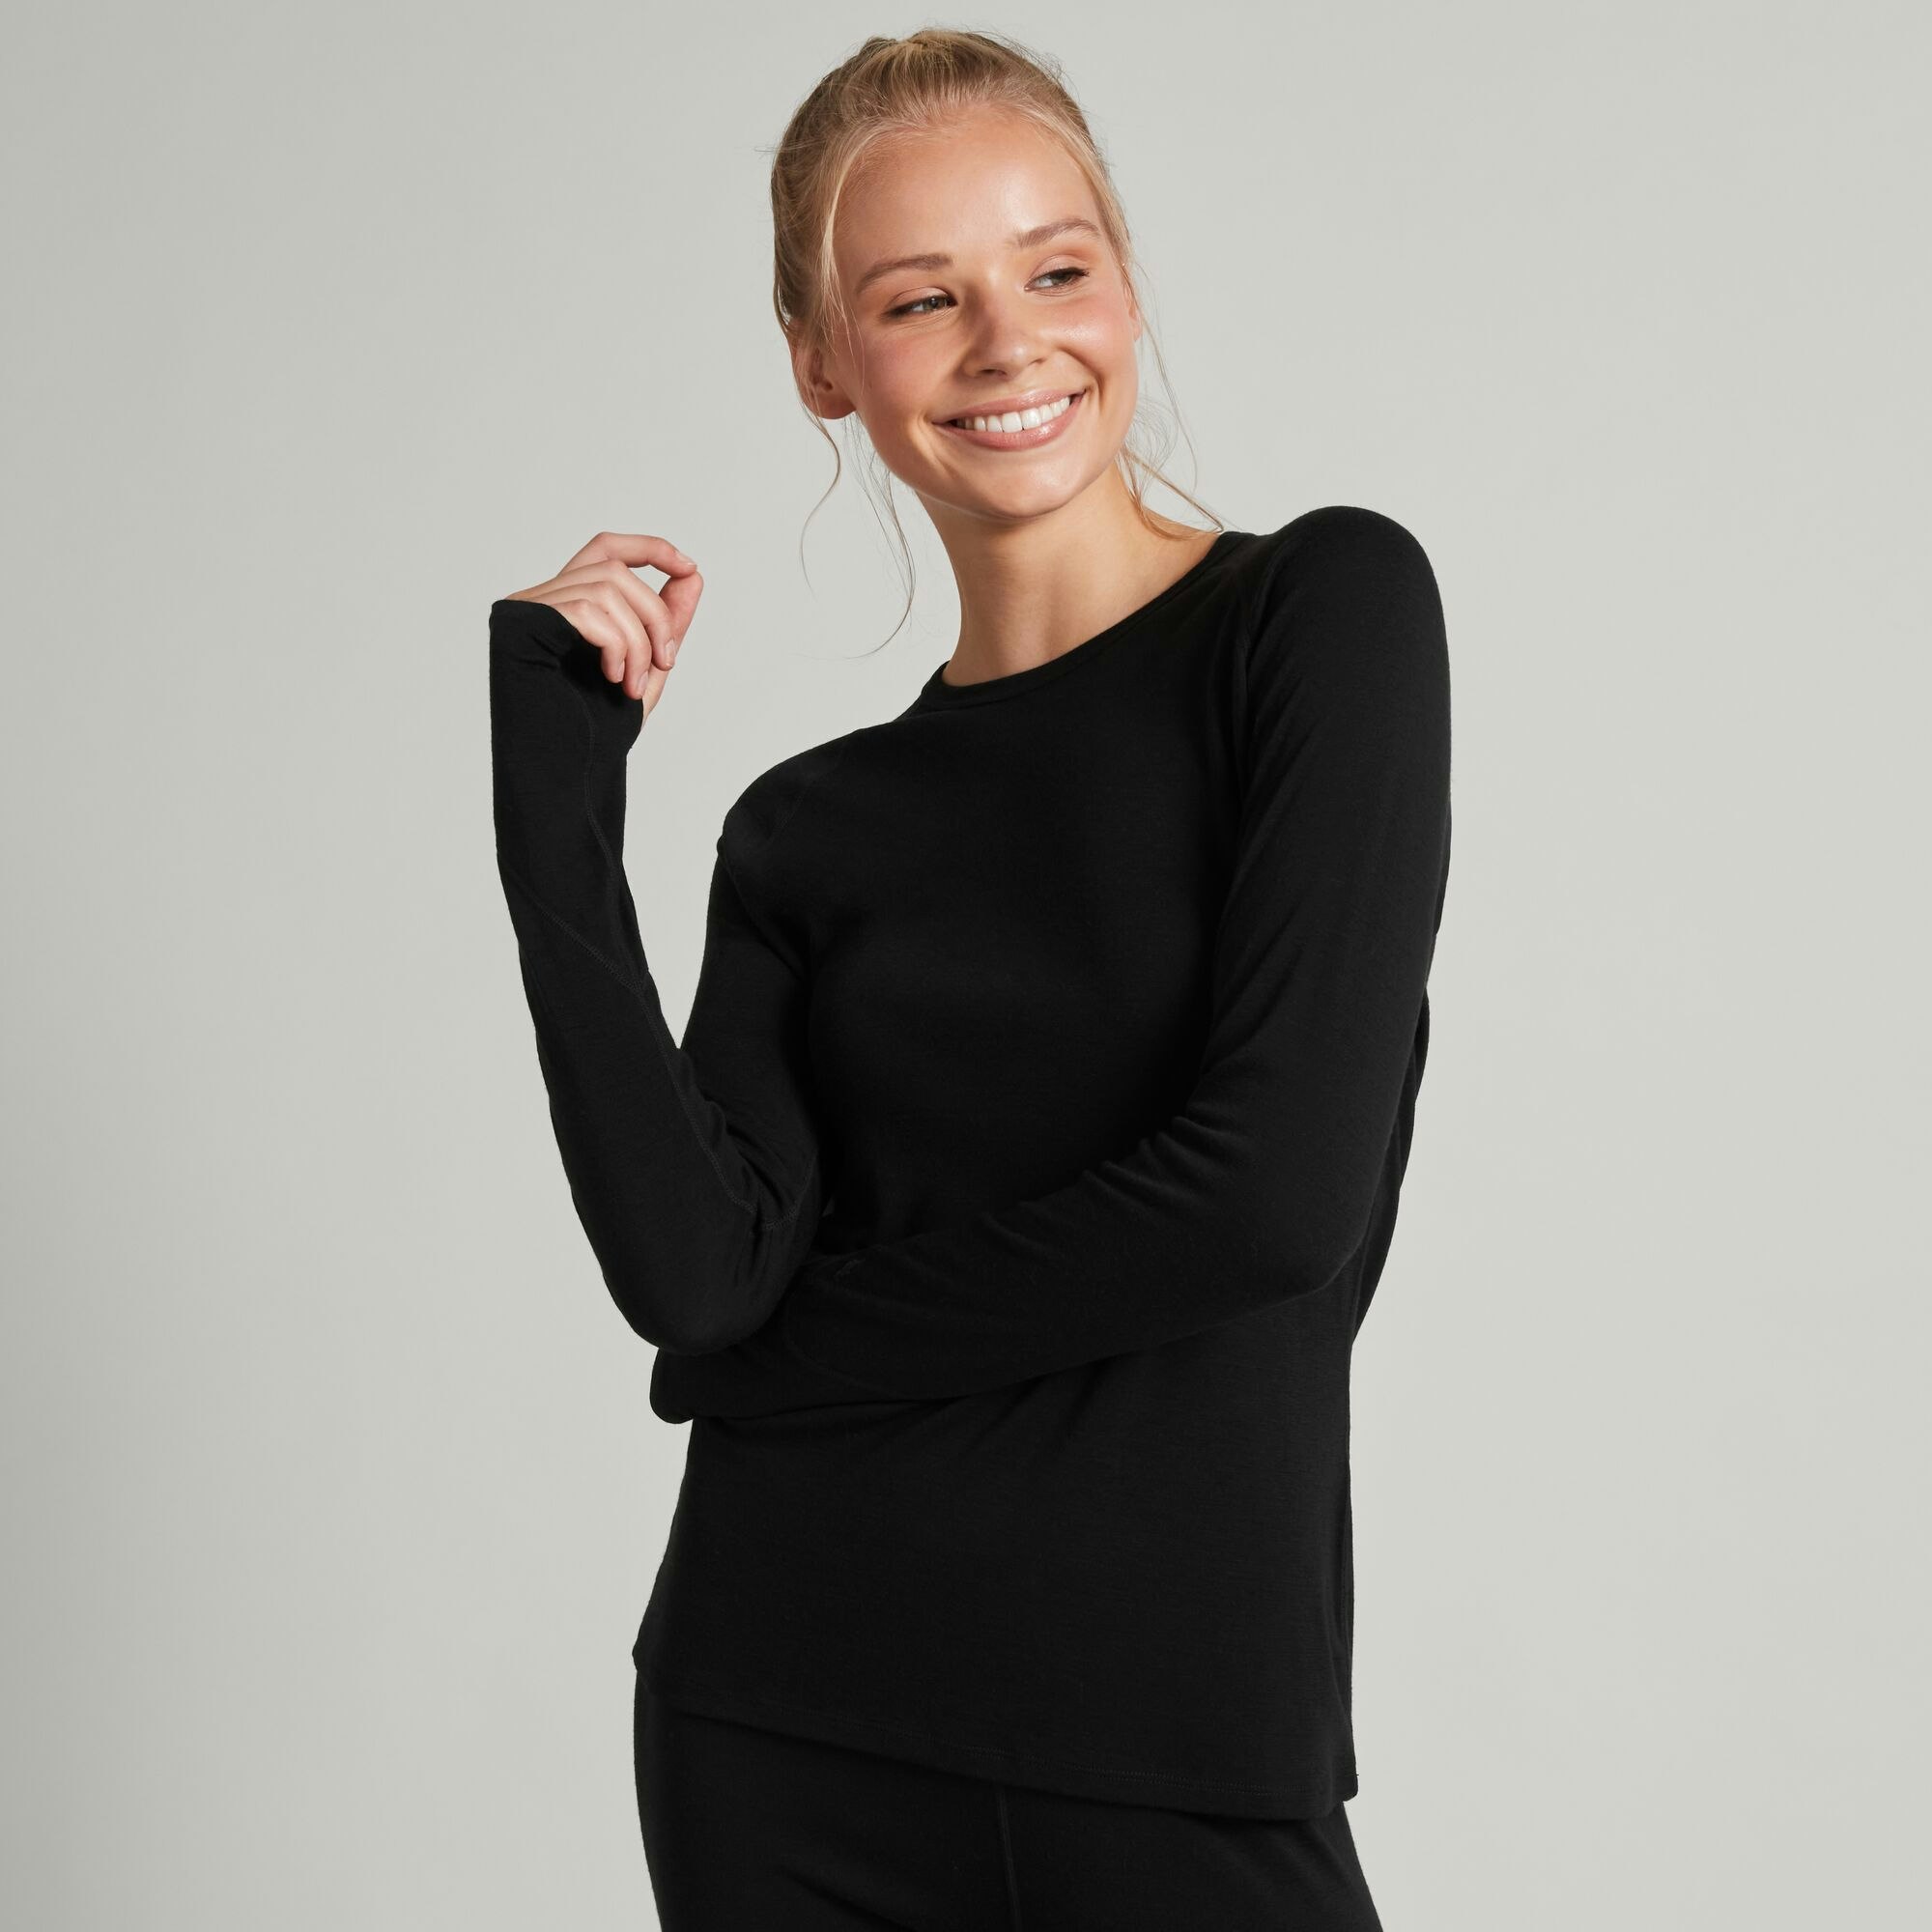 Buy One Get One Free: Kmd Core Thermal Underwear (Tops and Bottoms